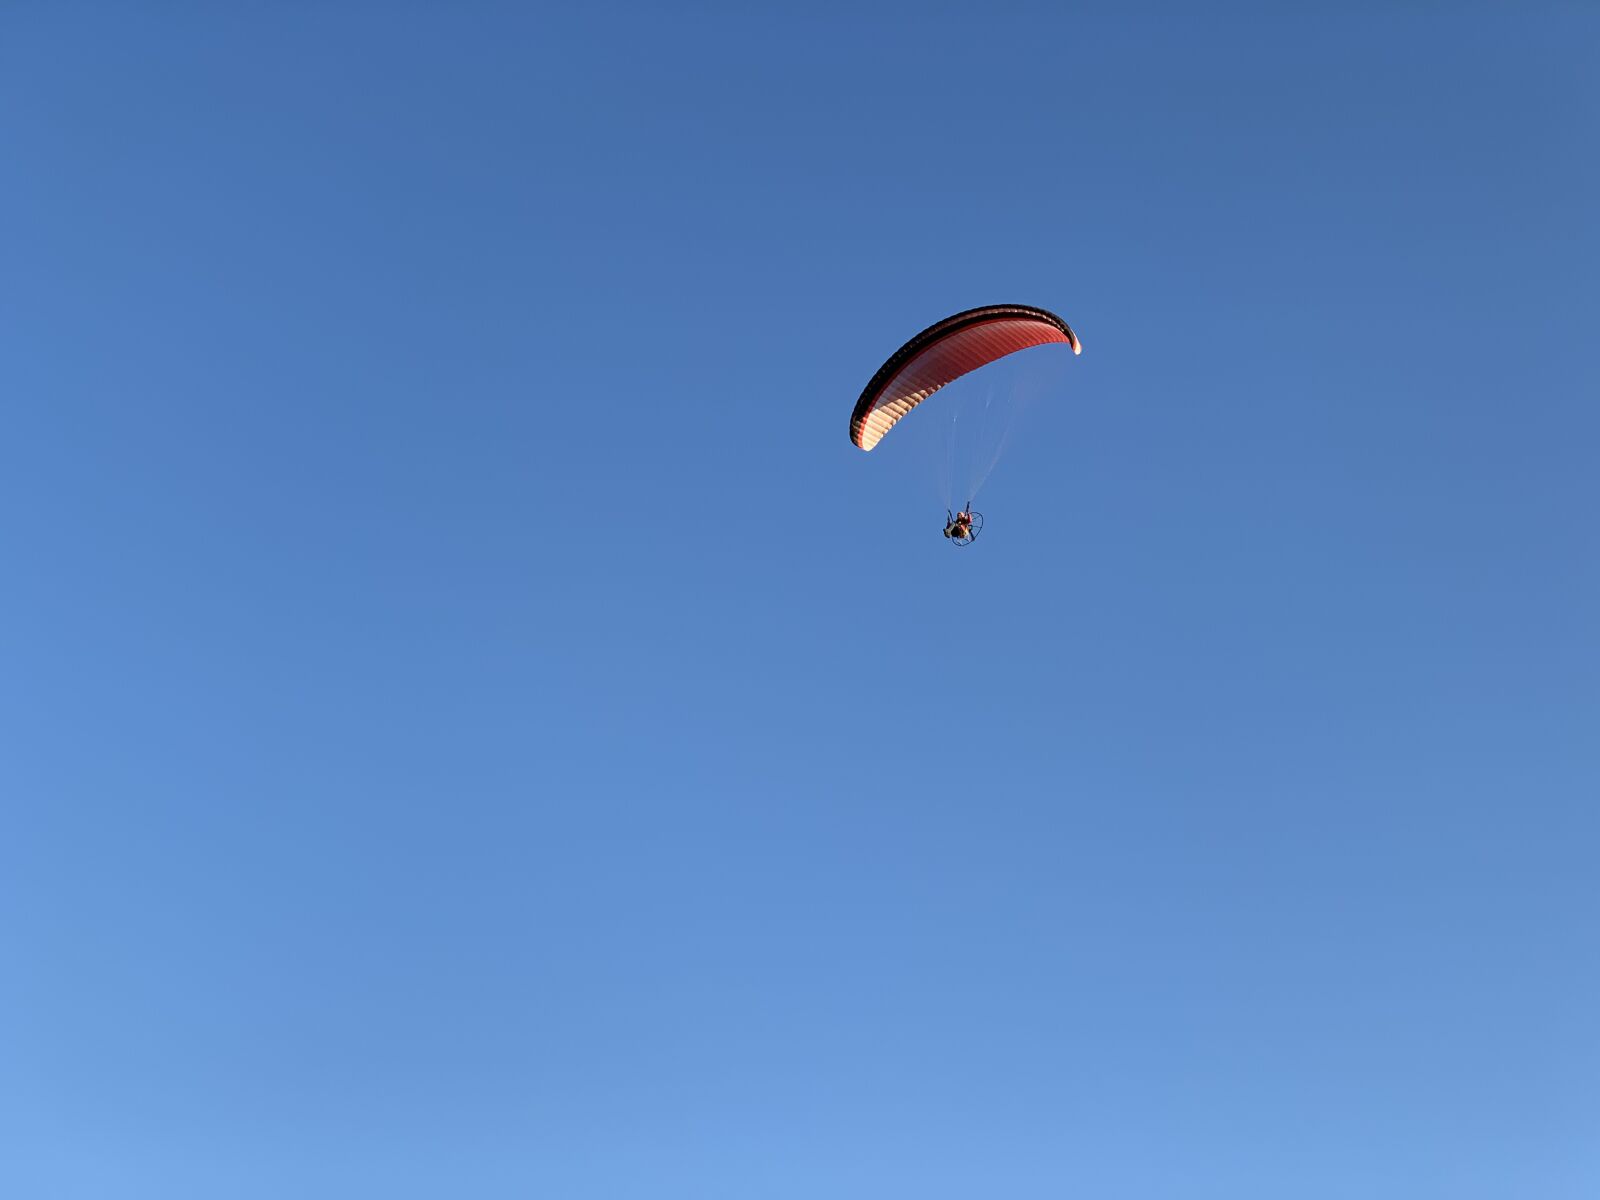 Apple iPhone XS + iPhone XS back dual camera 6mm f/2.4 sample photo. Paragliding, sky, flying photography